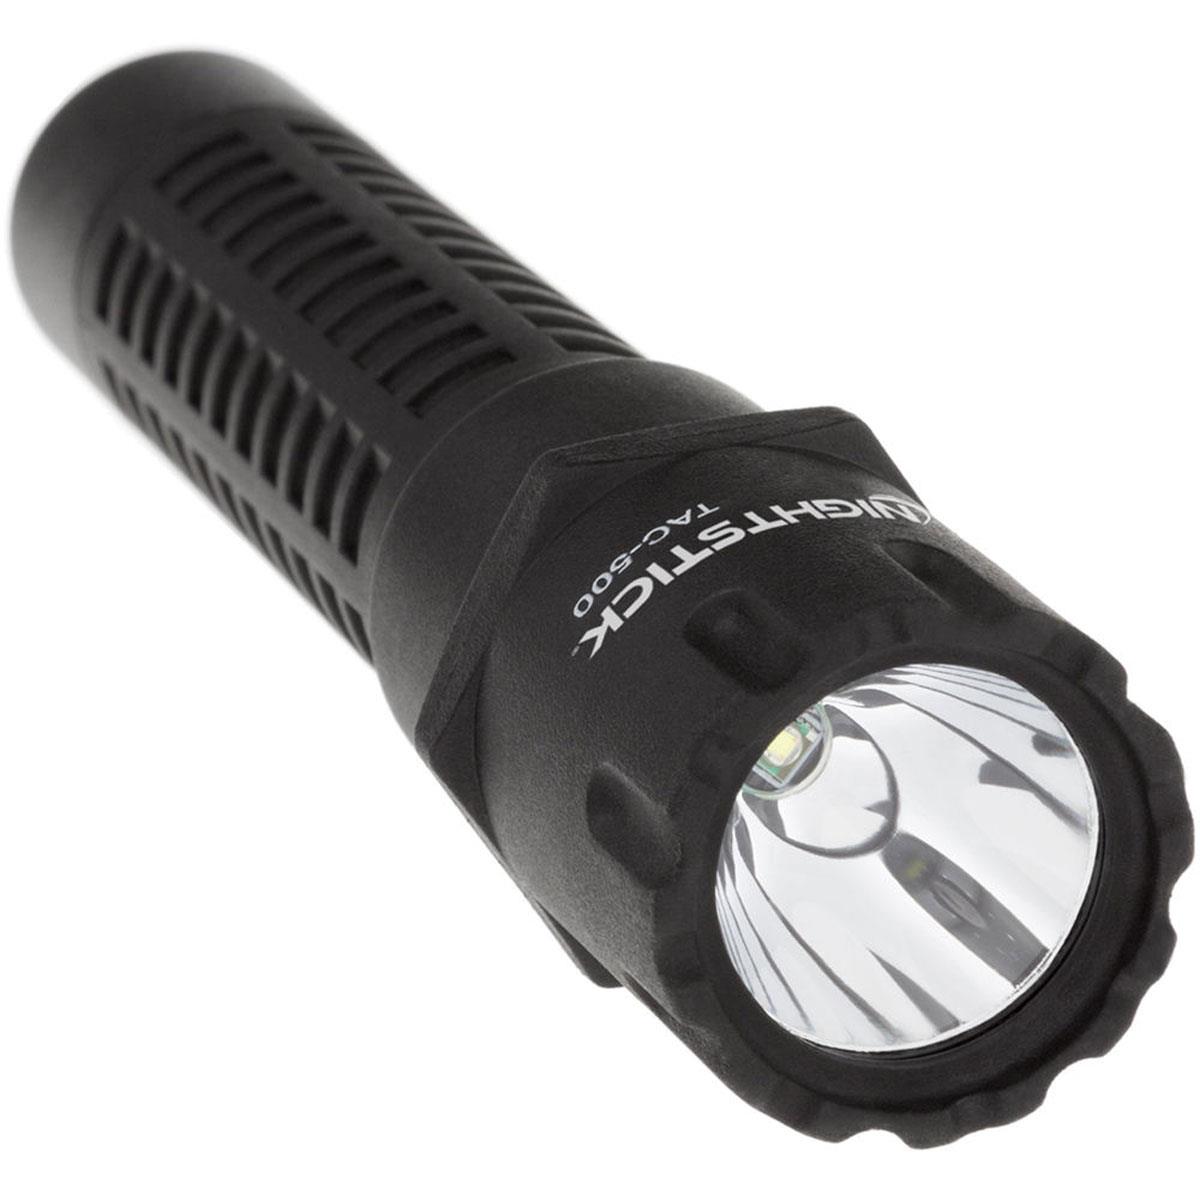 Polymer Tactical Rechargeable LED Flashlight, Black - Nightstick TAC-500B